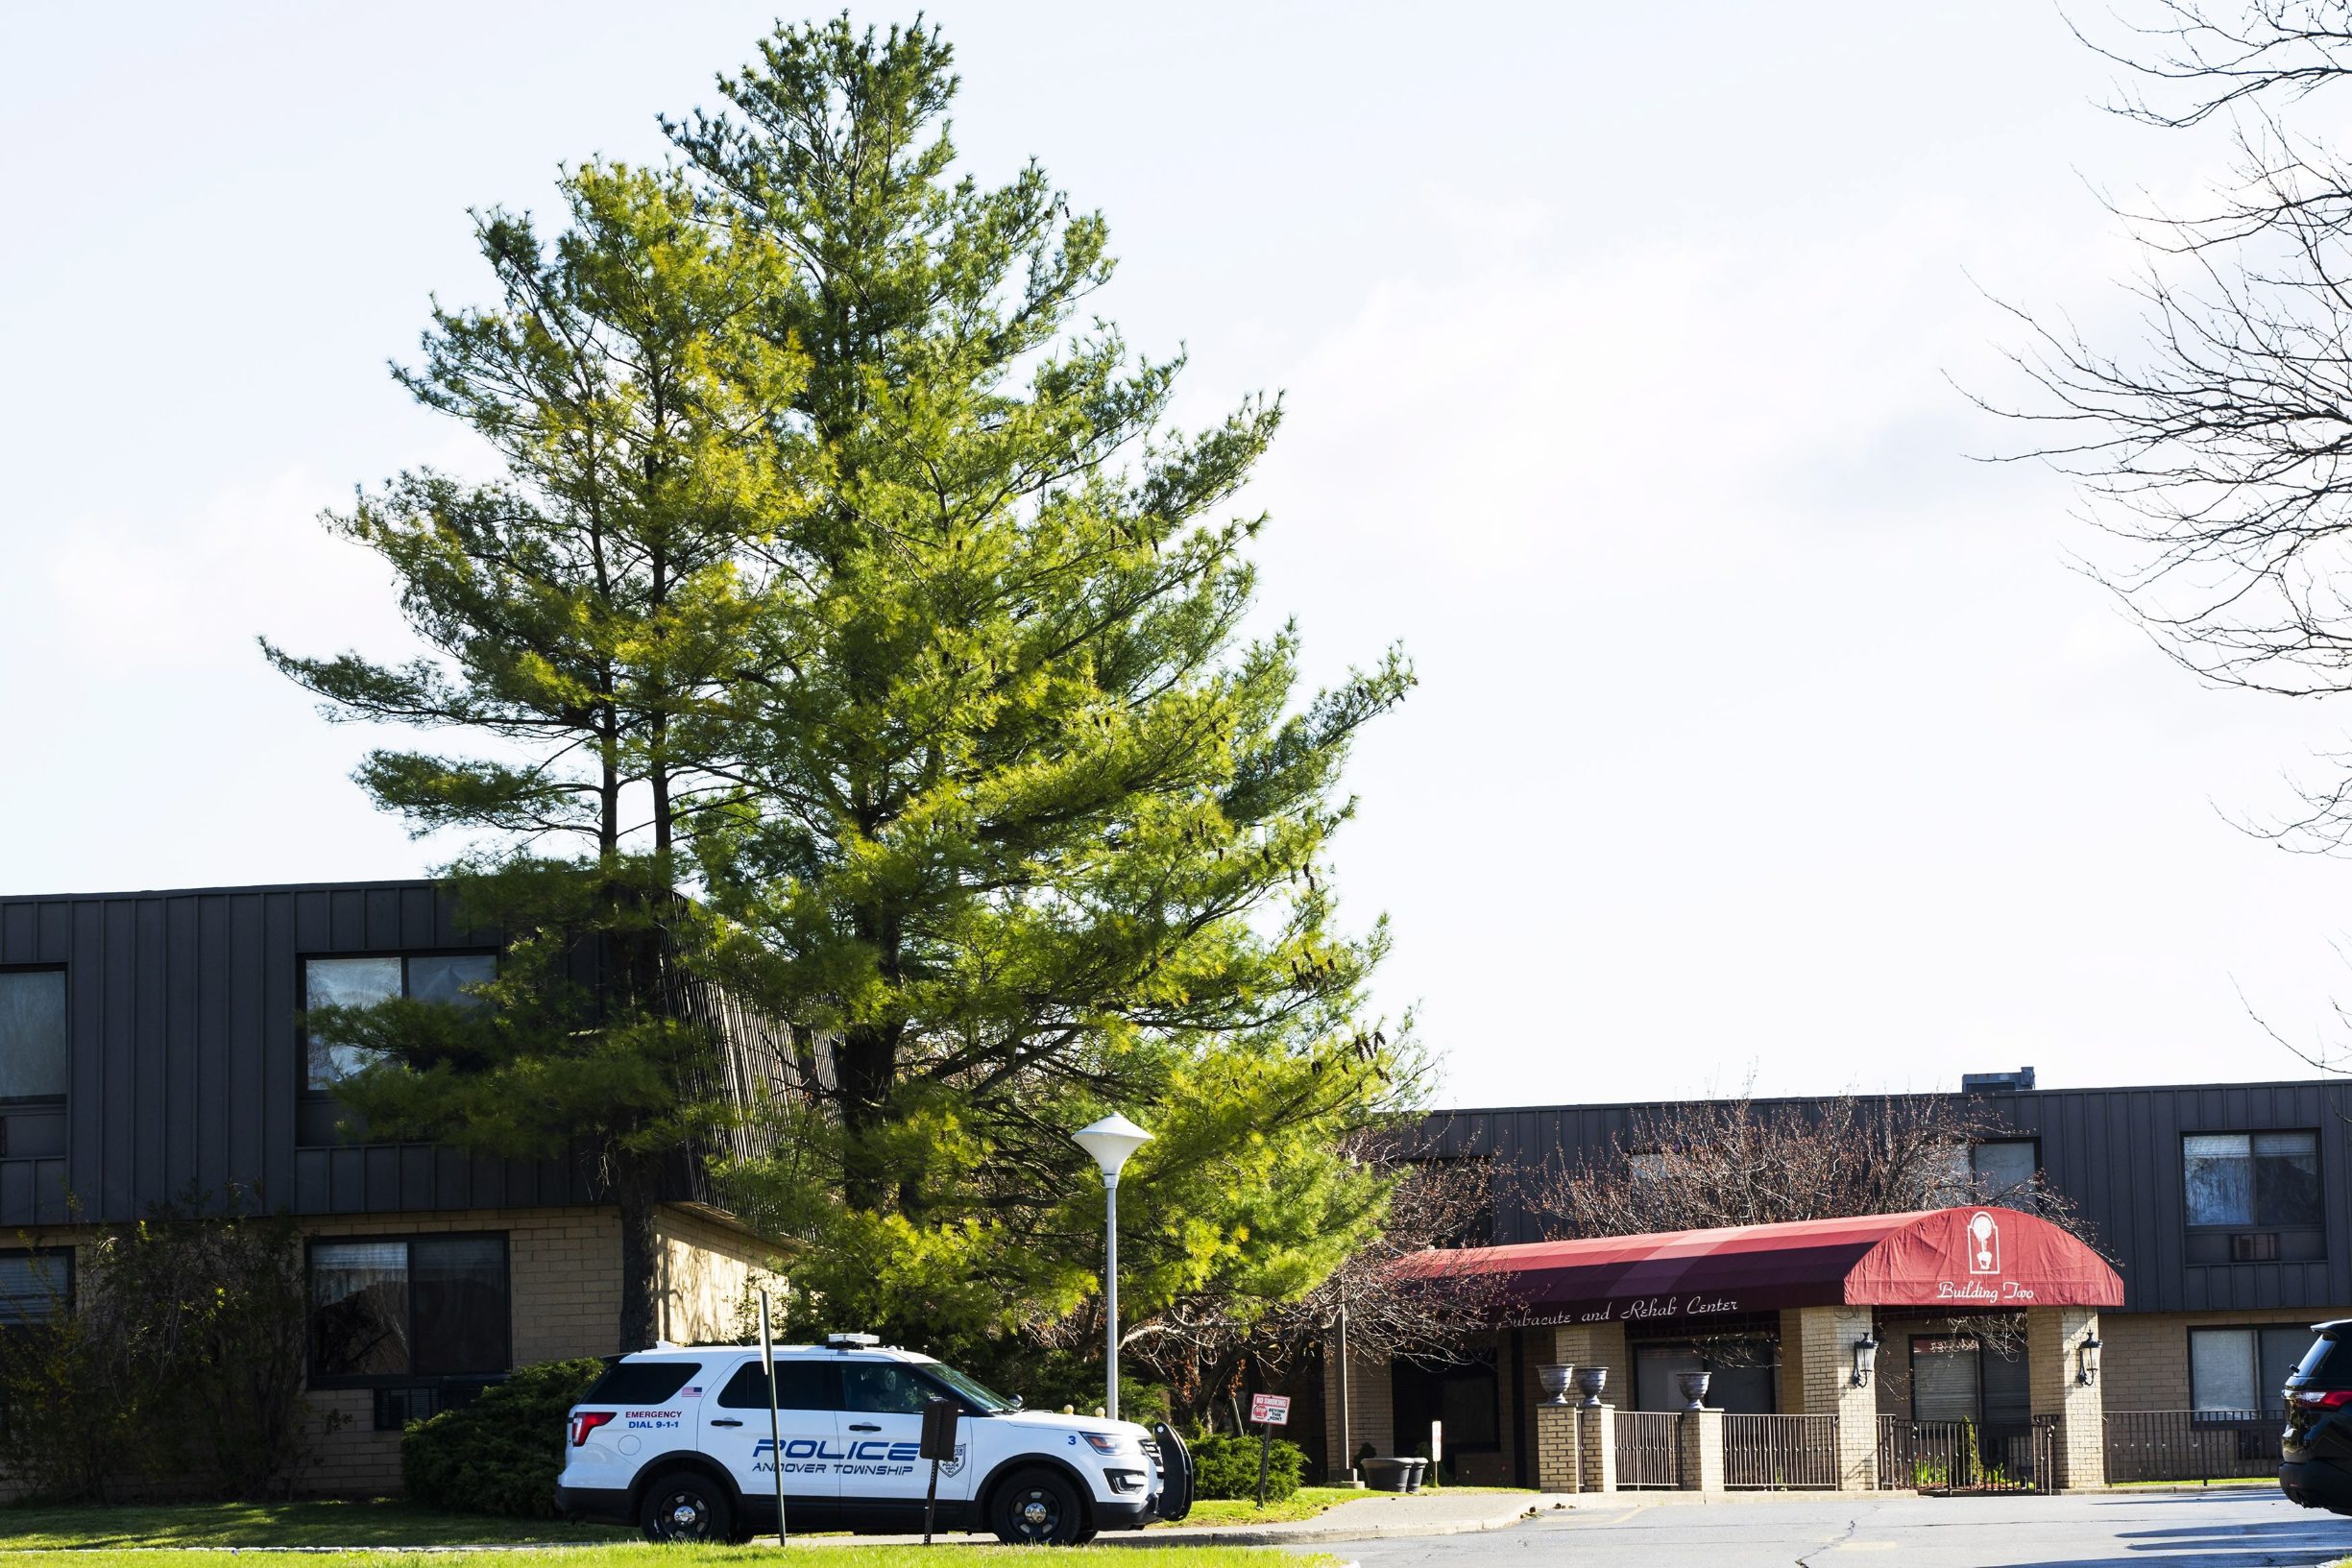 ANDOVER, NJ - APRIL 16: A New Jersey Police vehicle parks at the entrance of Andover Subacute and Rehabilitation Center on April 16, 2020 in Andover, New Jersey. After an anonymous tip to police, 17 people were found dead at the long-term care facility, including two nurses, where at least 76 patients and 41 staff members have tested positive for COVID-19.   Eduardo Munoz Alvarez/Getty Images/AFP
== FOR NEWSPAPERS, INTERNET, TELCOS & TELEVISION USE ONLY ==